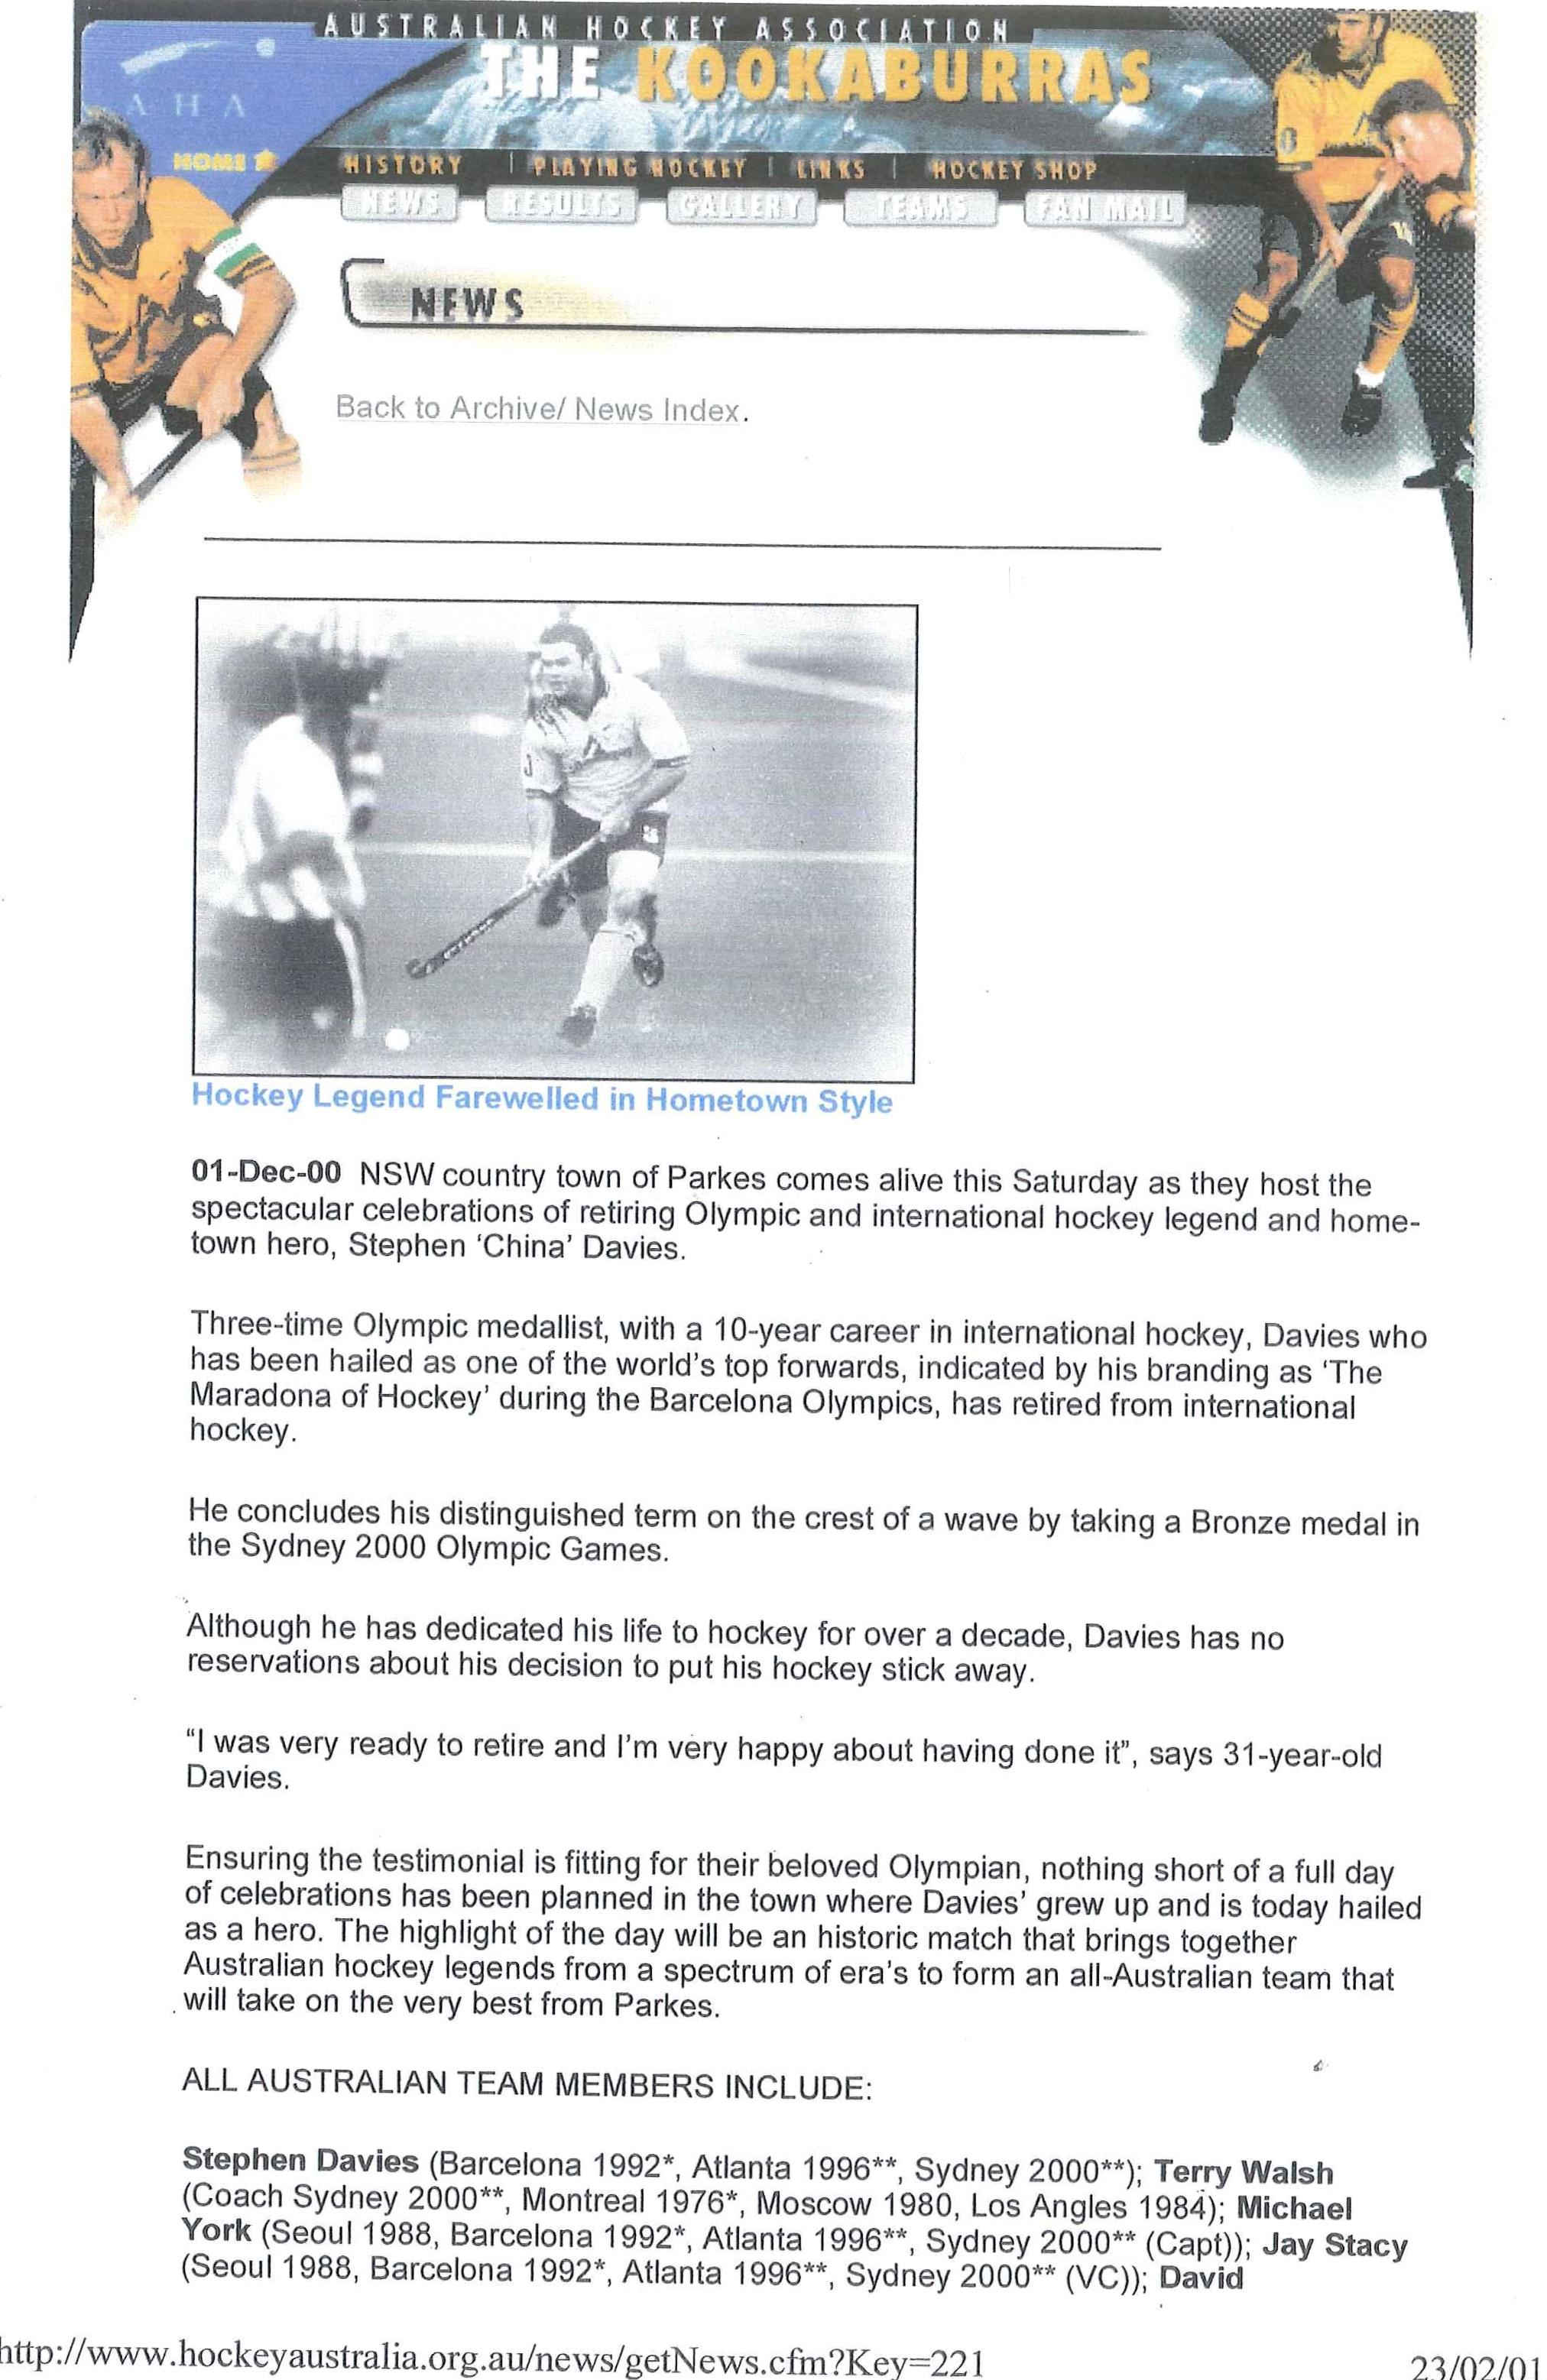 Another collection from Davies' scrapbook. This is a printout from a now defunct url on the Hockey Australia website. Photograph courtesy of John and Brenda Davies